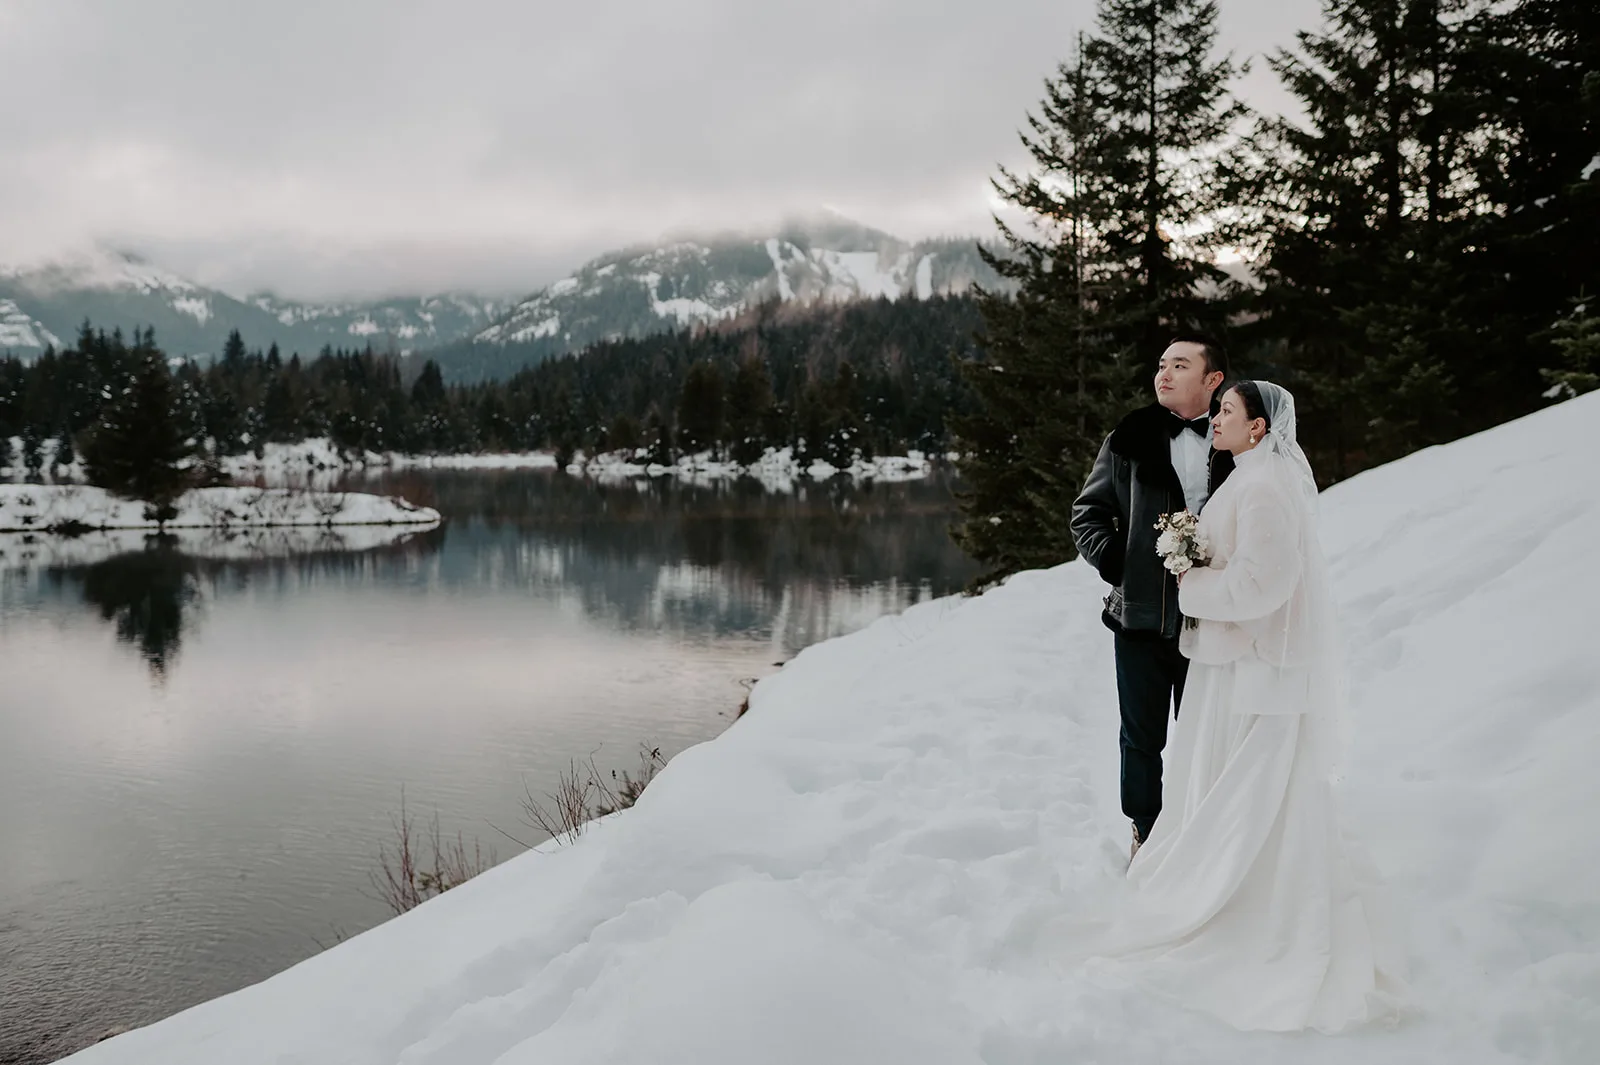 Bride and groom stand together, enveloped in the quiet snowy scenery.